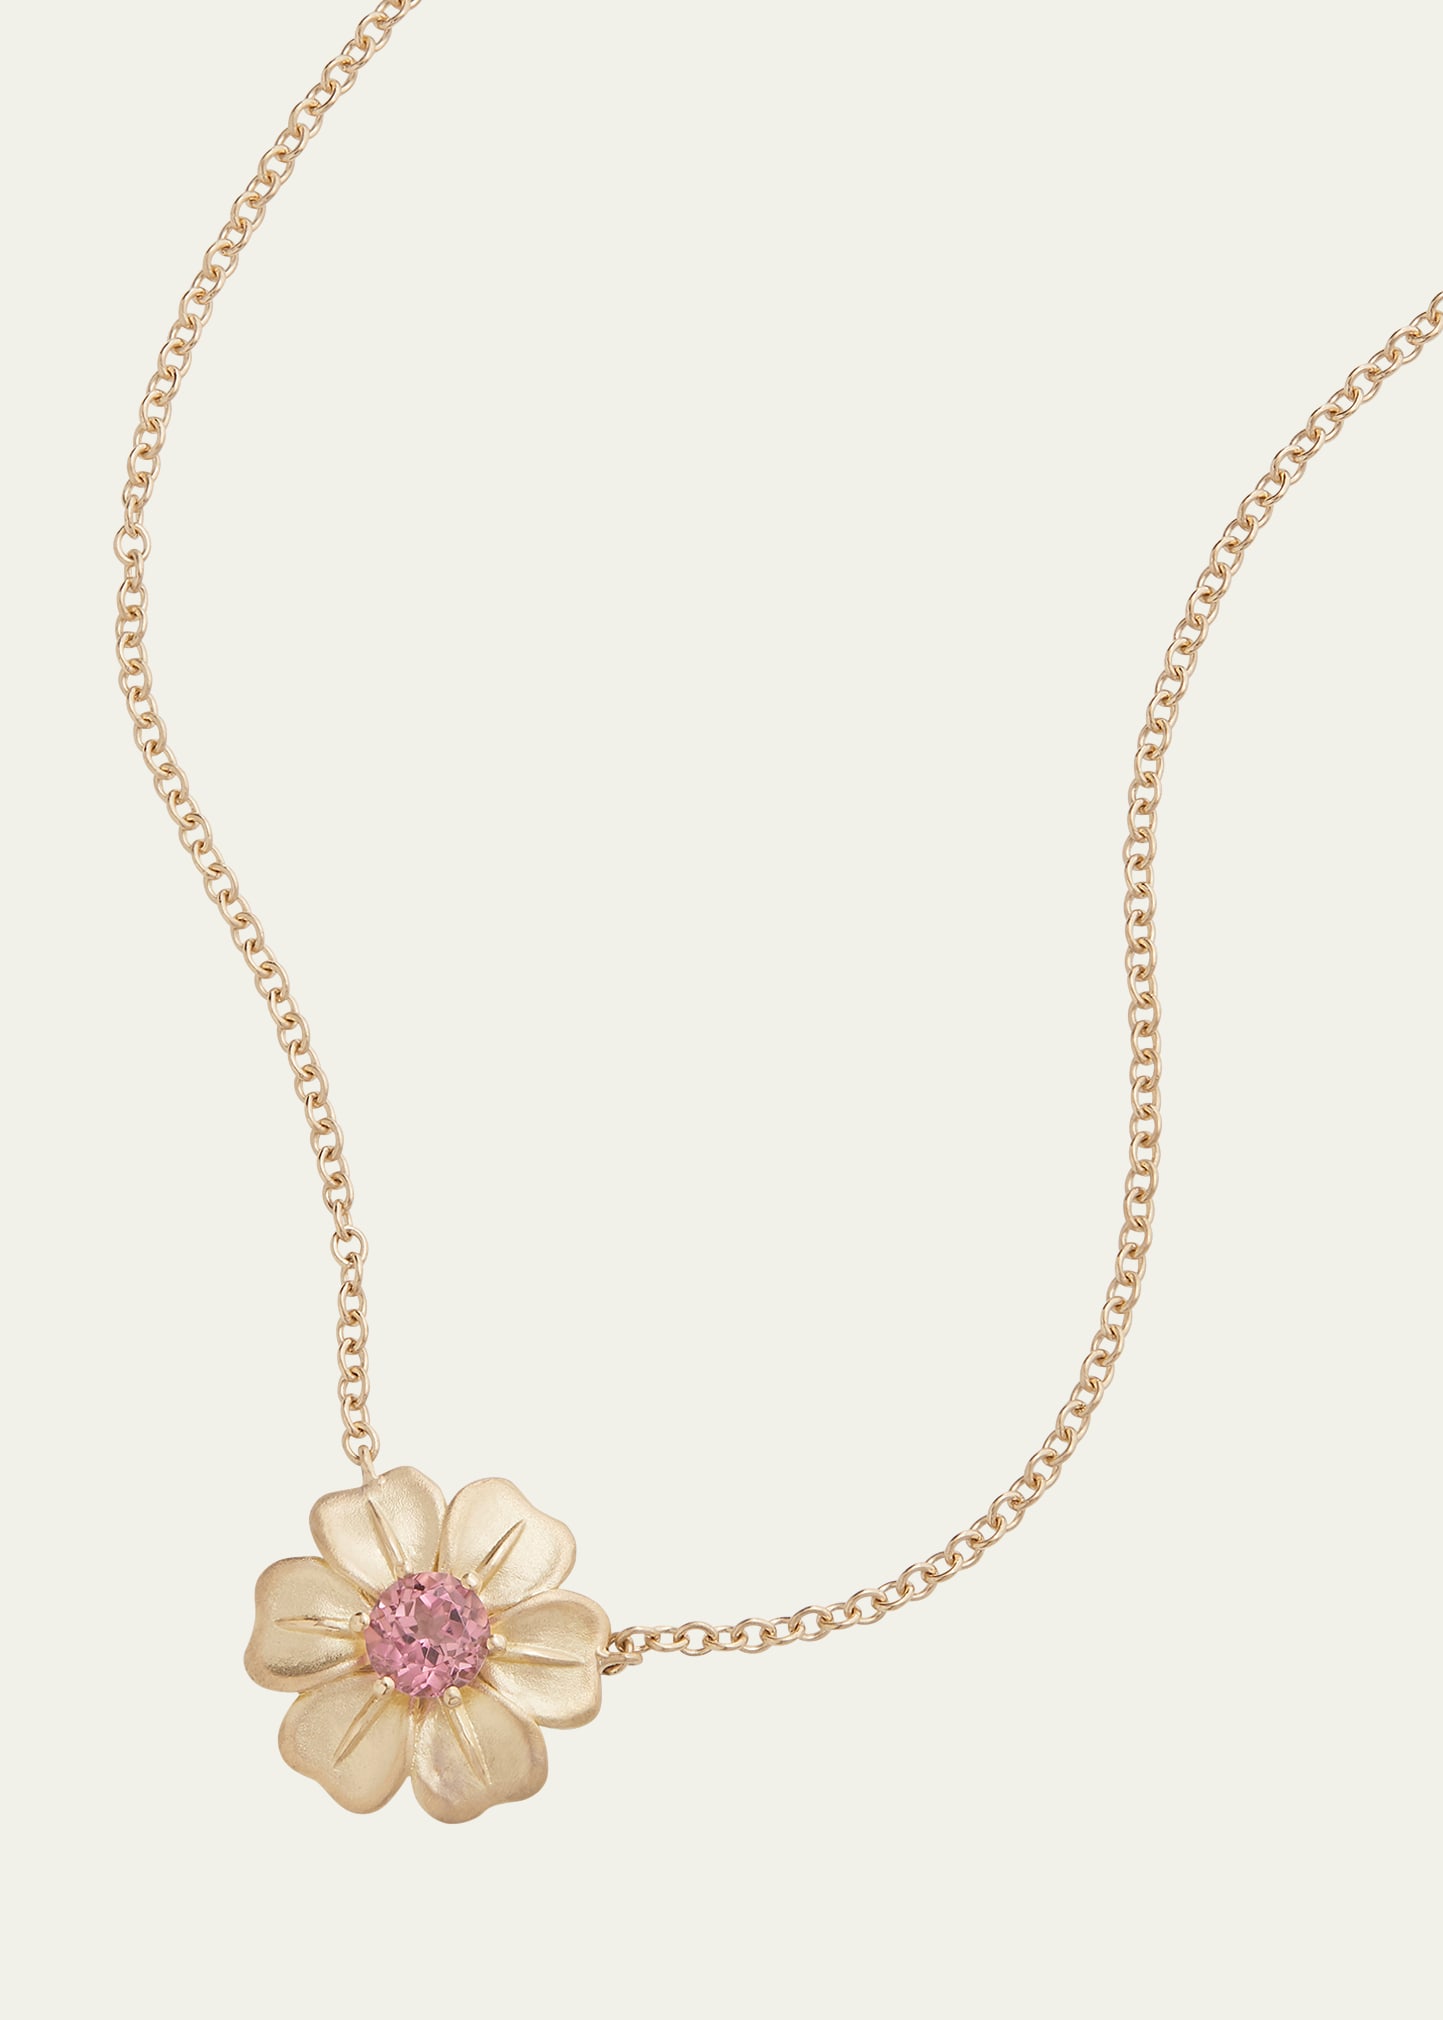 18K Yellow Gold Flower Pendant Necklace with Pink Tourmaline